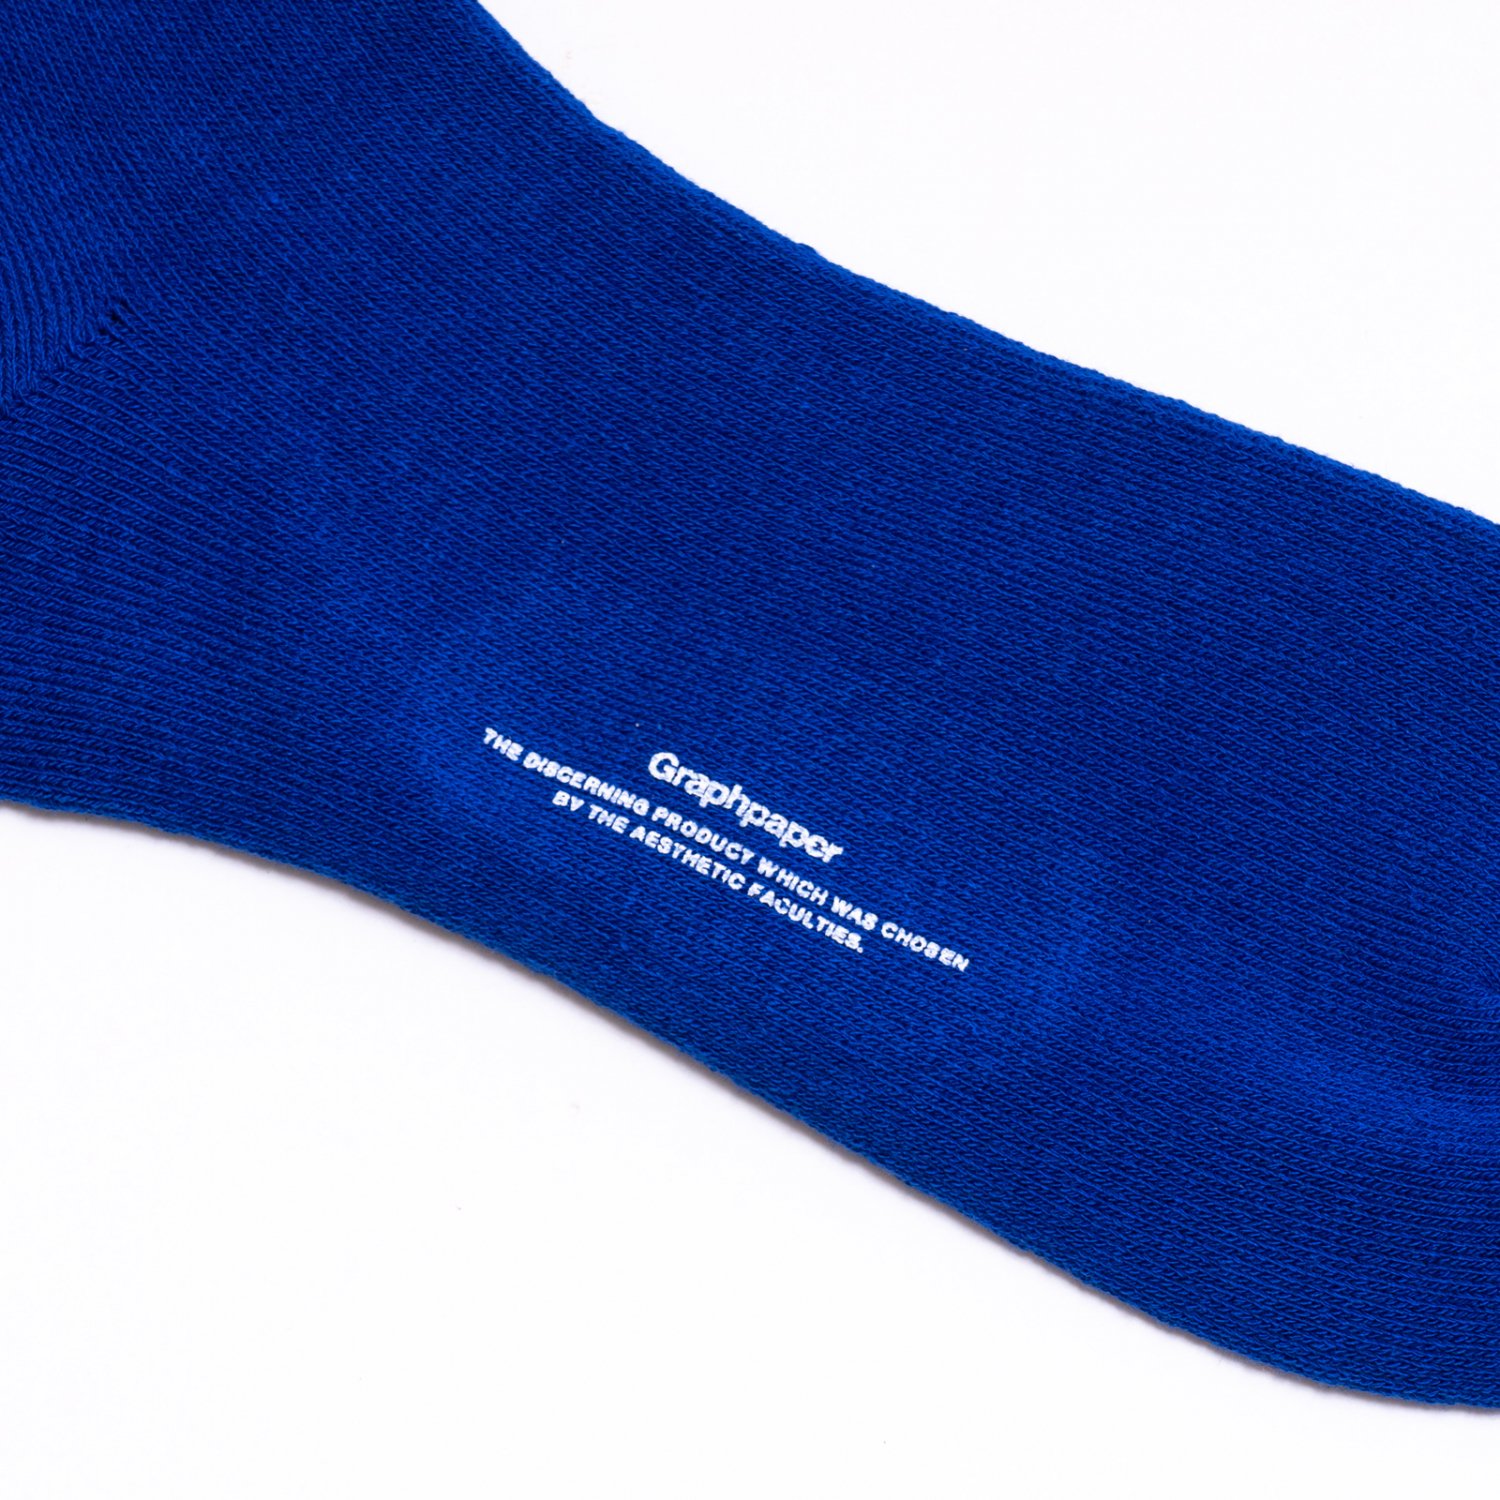 Graphpaper * 22SS Collection Graphpaper 3-Pack Socks(3色展開)